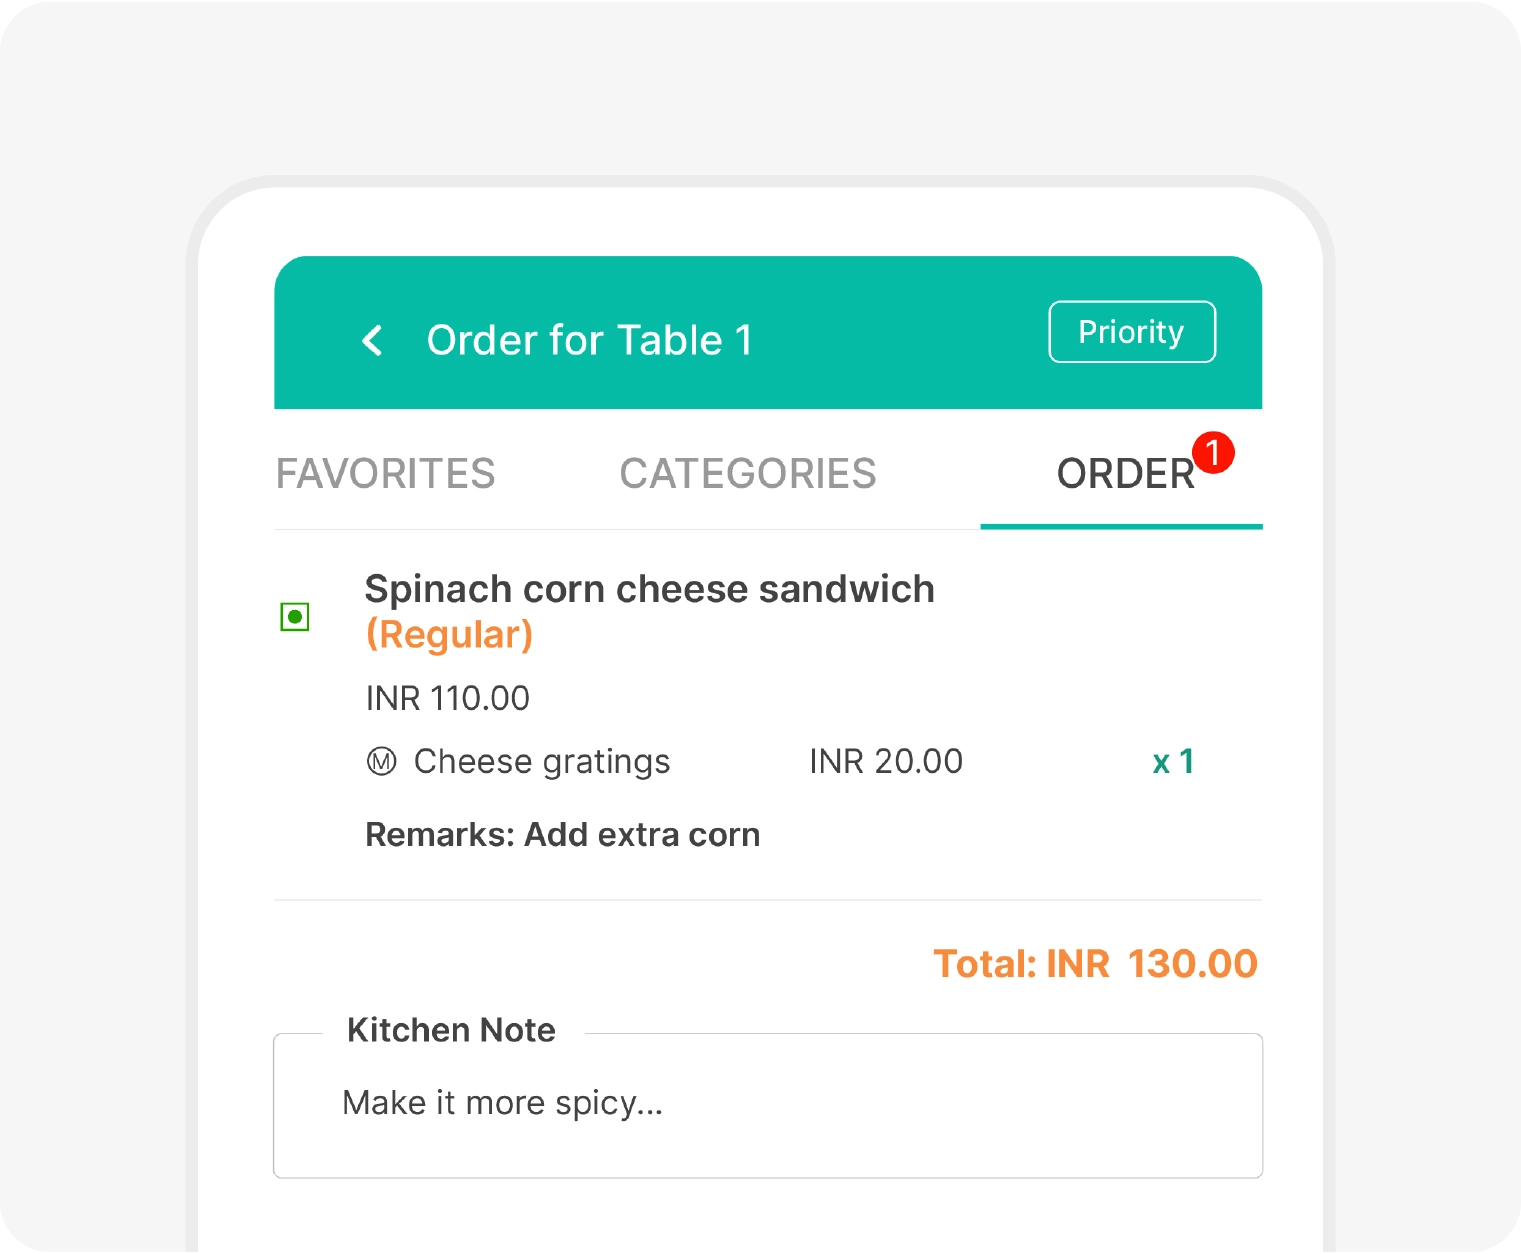 Order customization and special requests with restaurant table management app